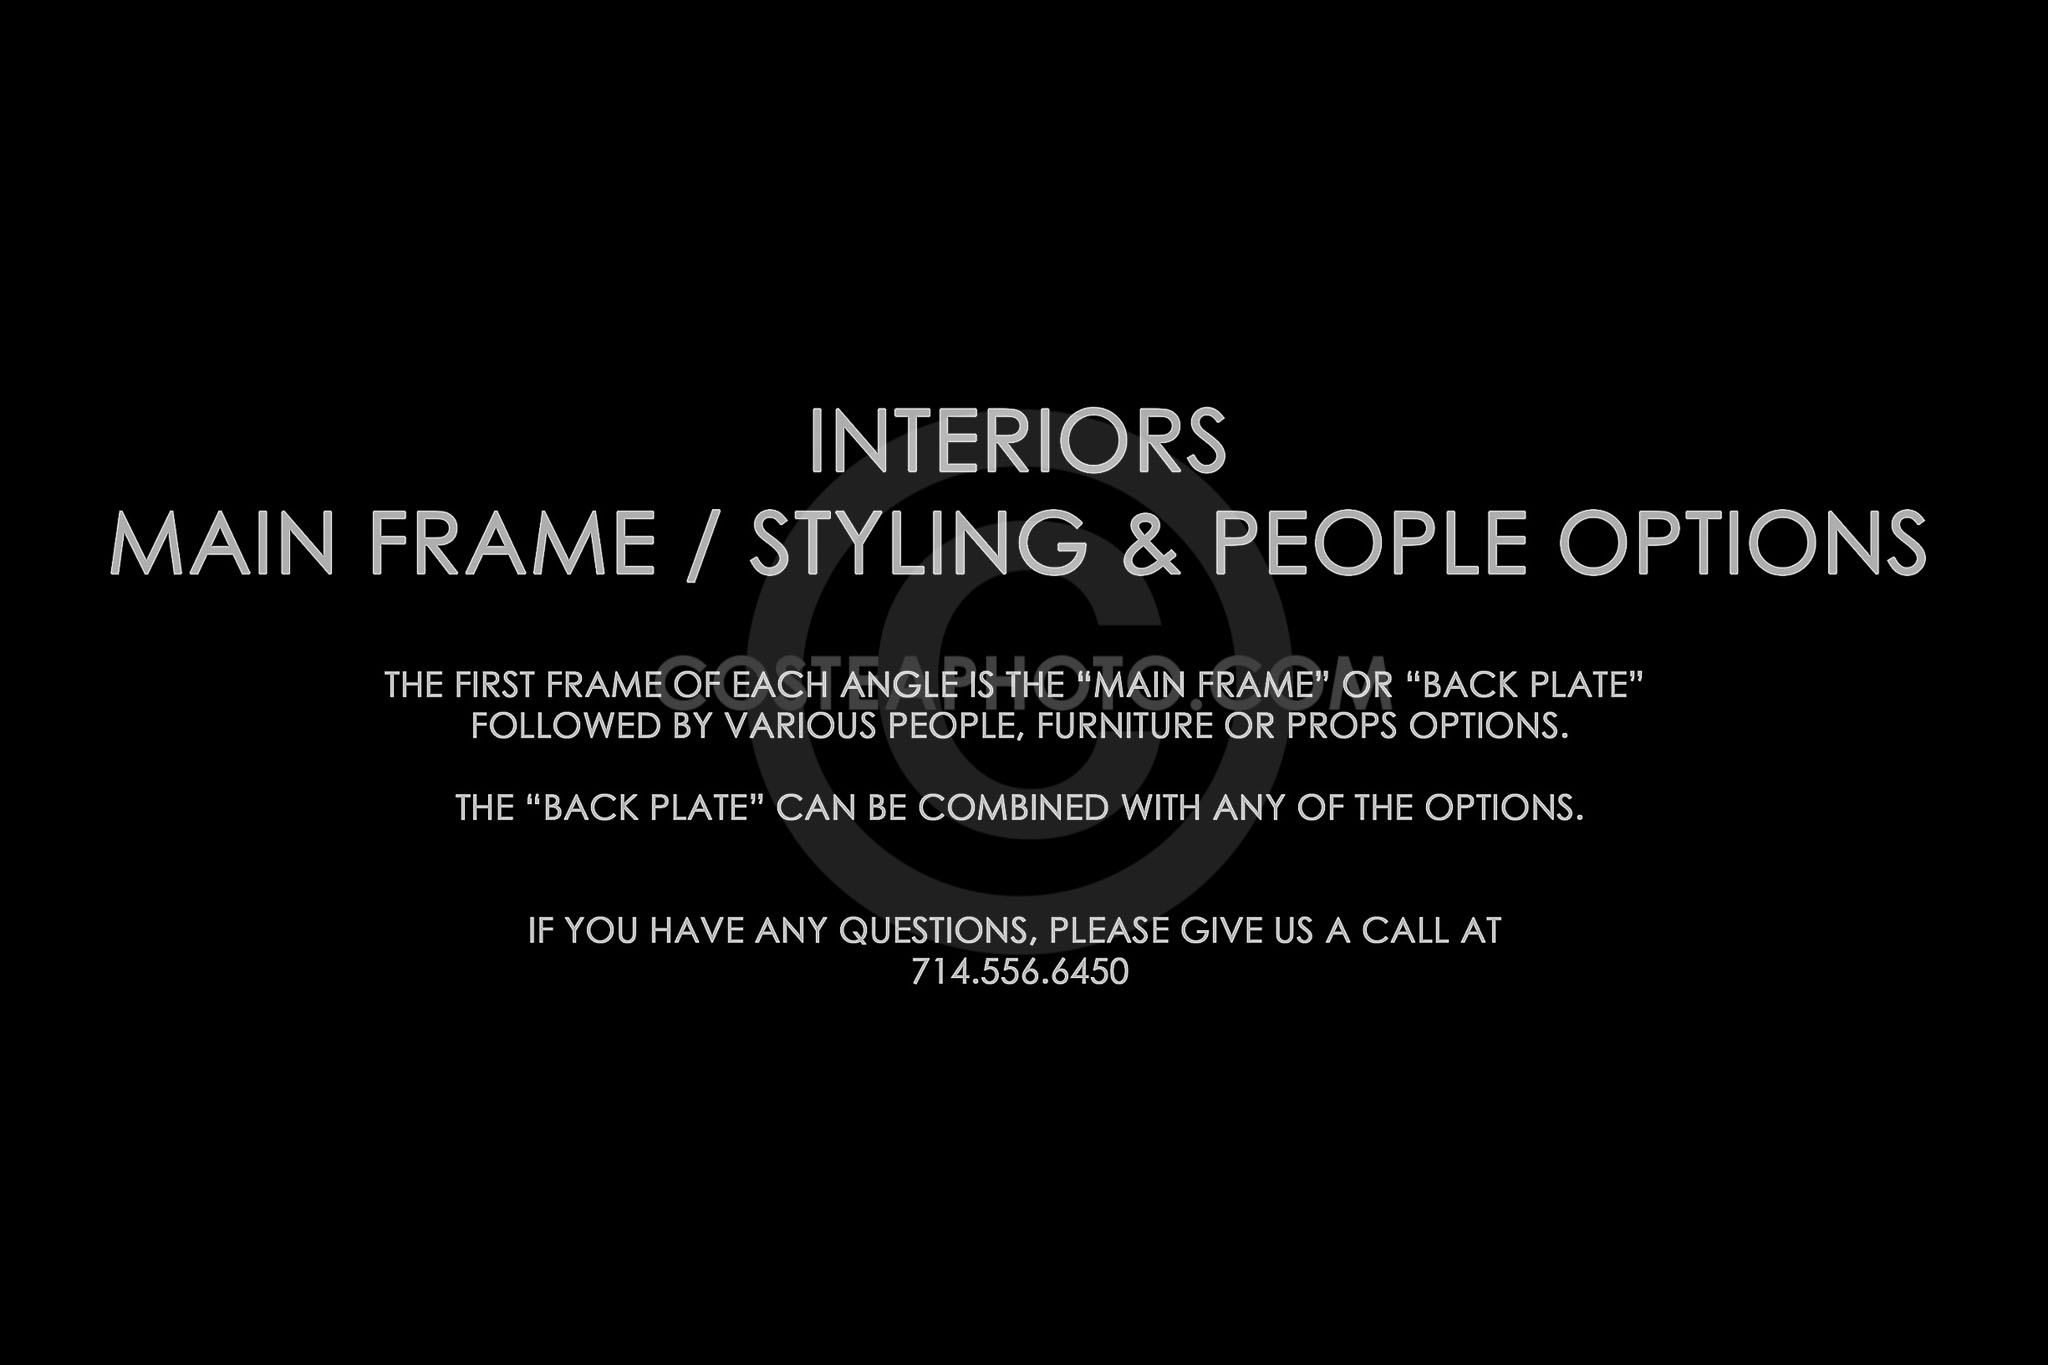 (008) TITLE PAGE - INTERIORS MAIN AND OPTIONS